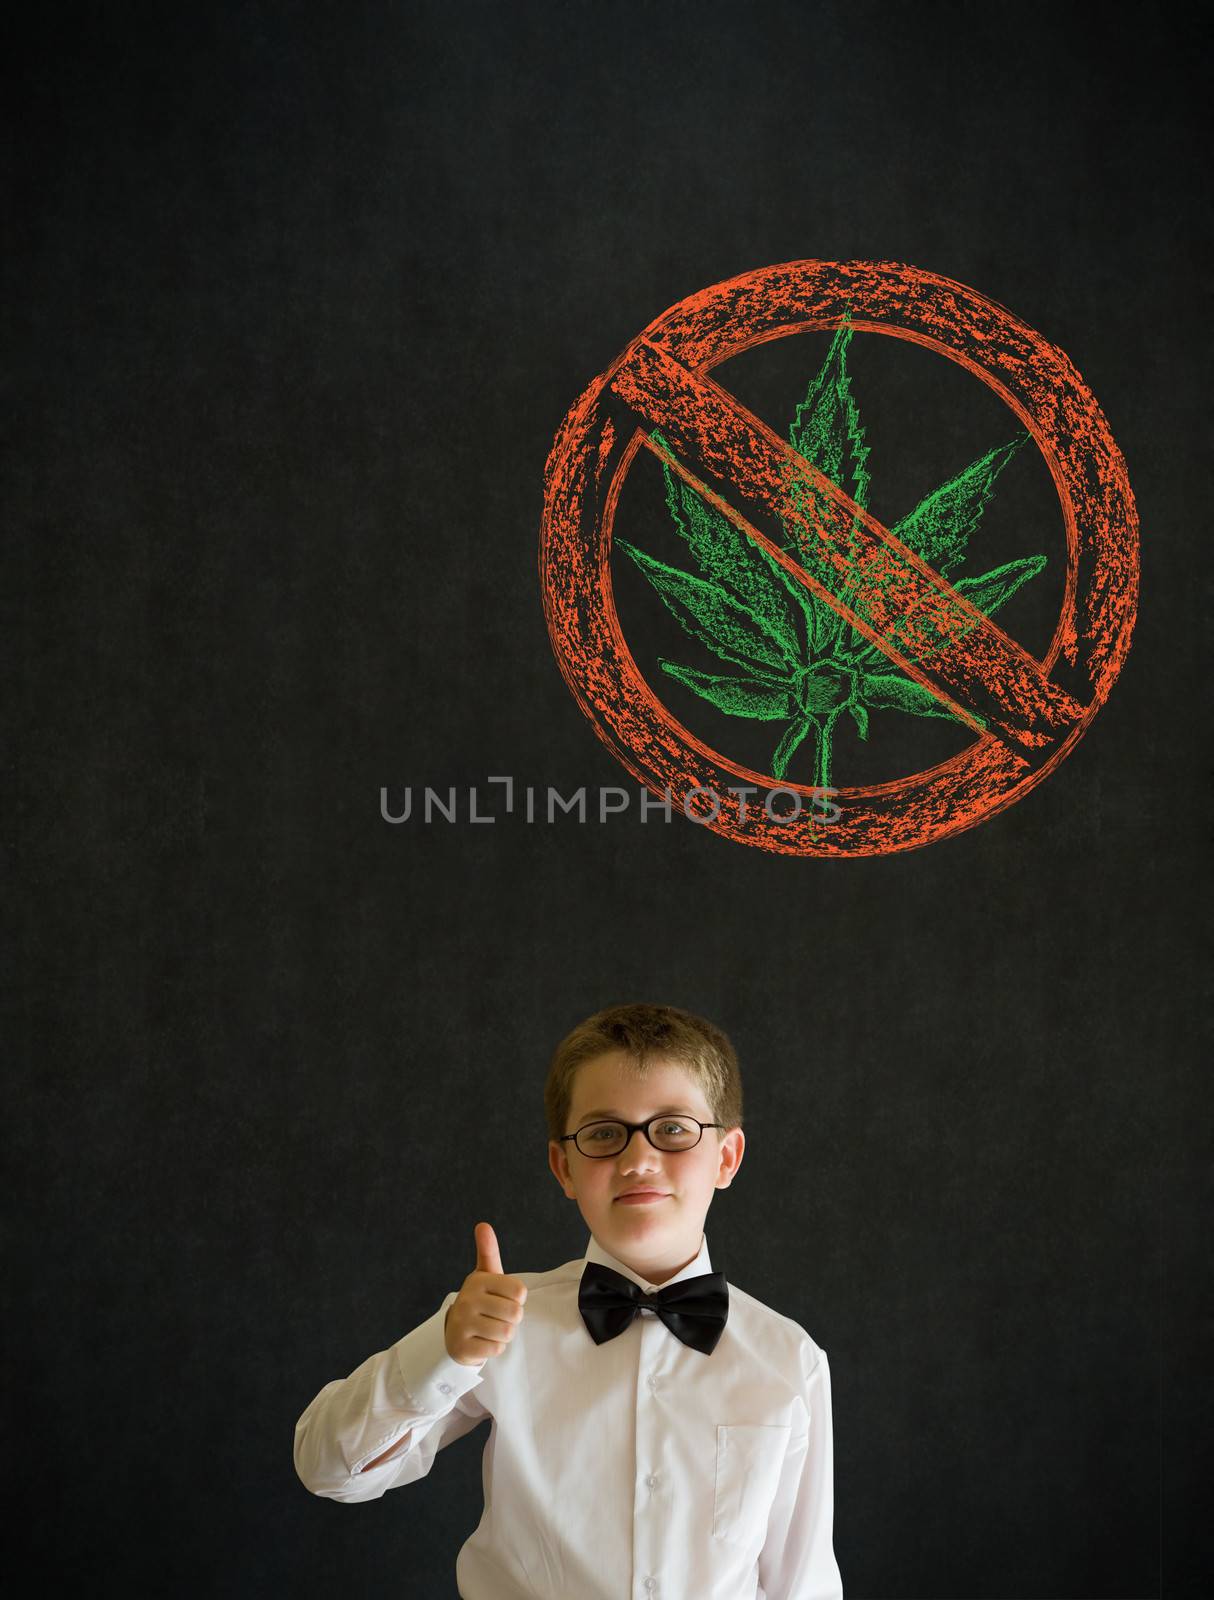 Thumbs up boy dressed up as business man with no weed marijuana on blackboard background